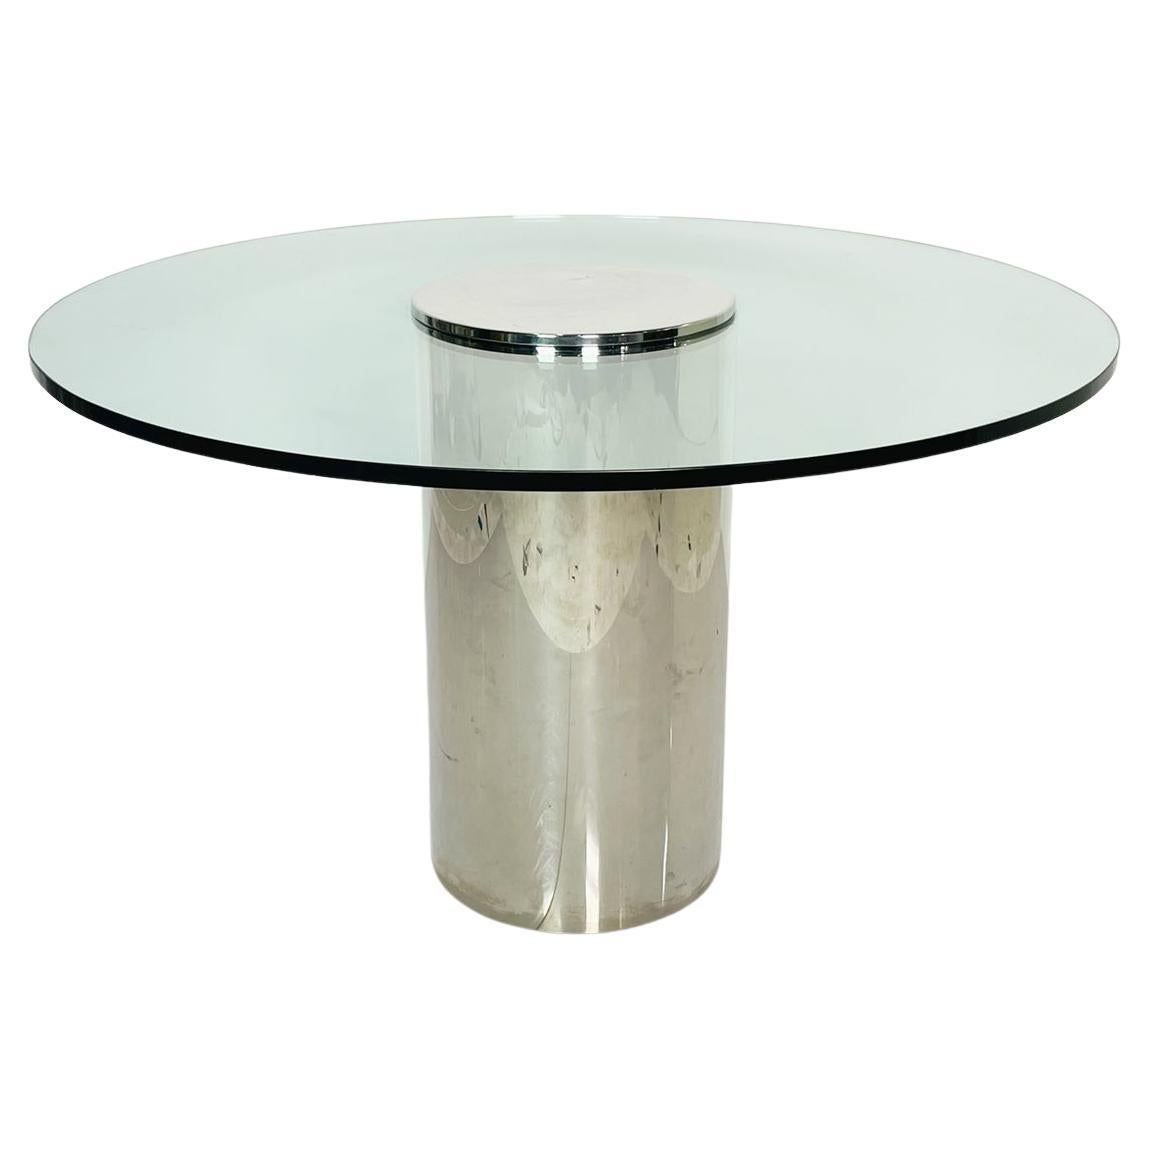 Chrome and Glass Pedestal Table by Pace Collection